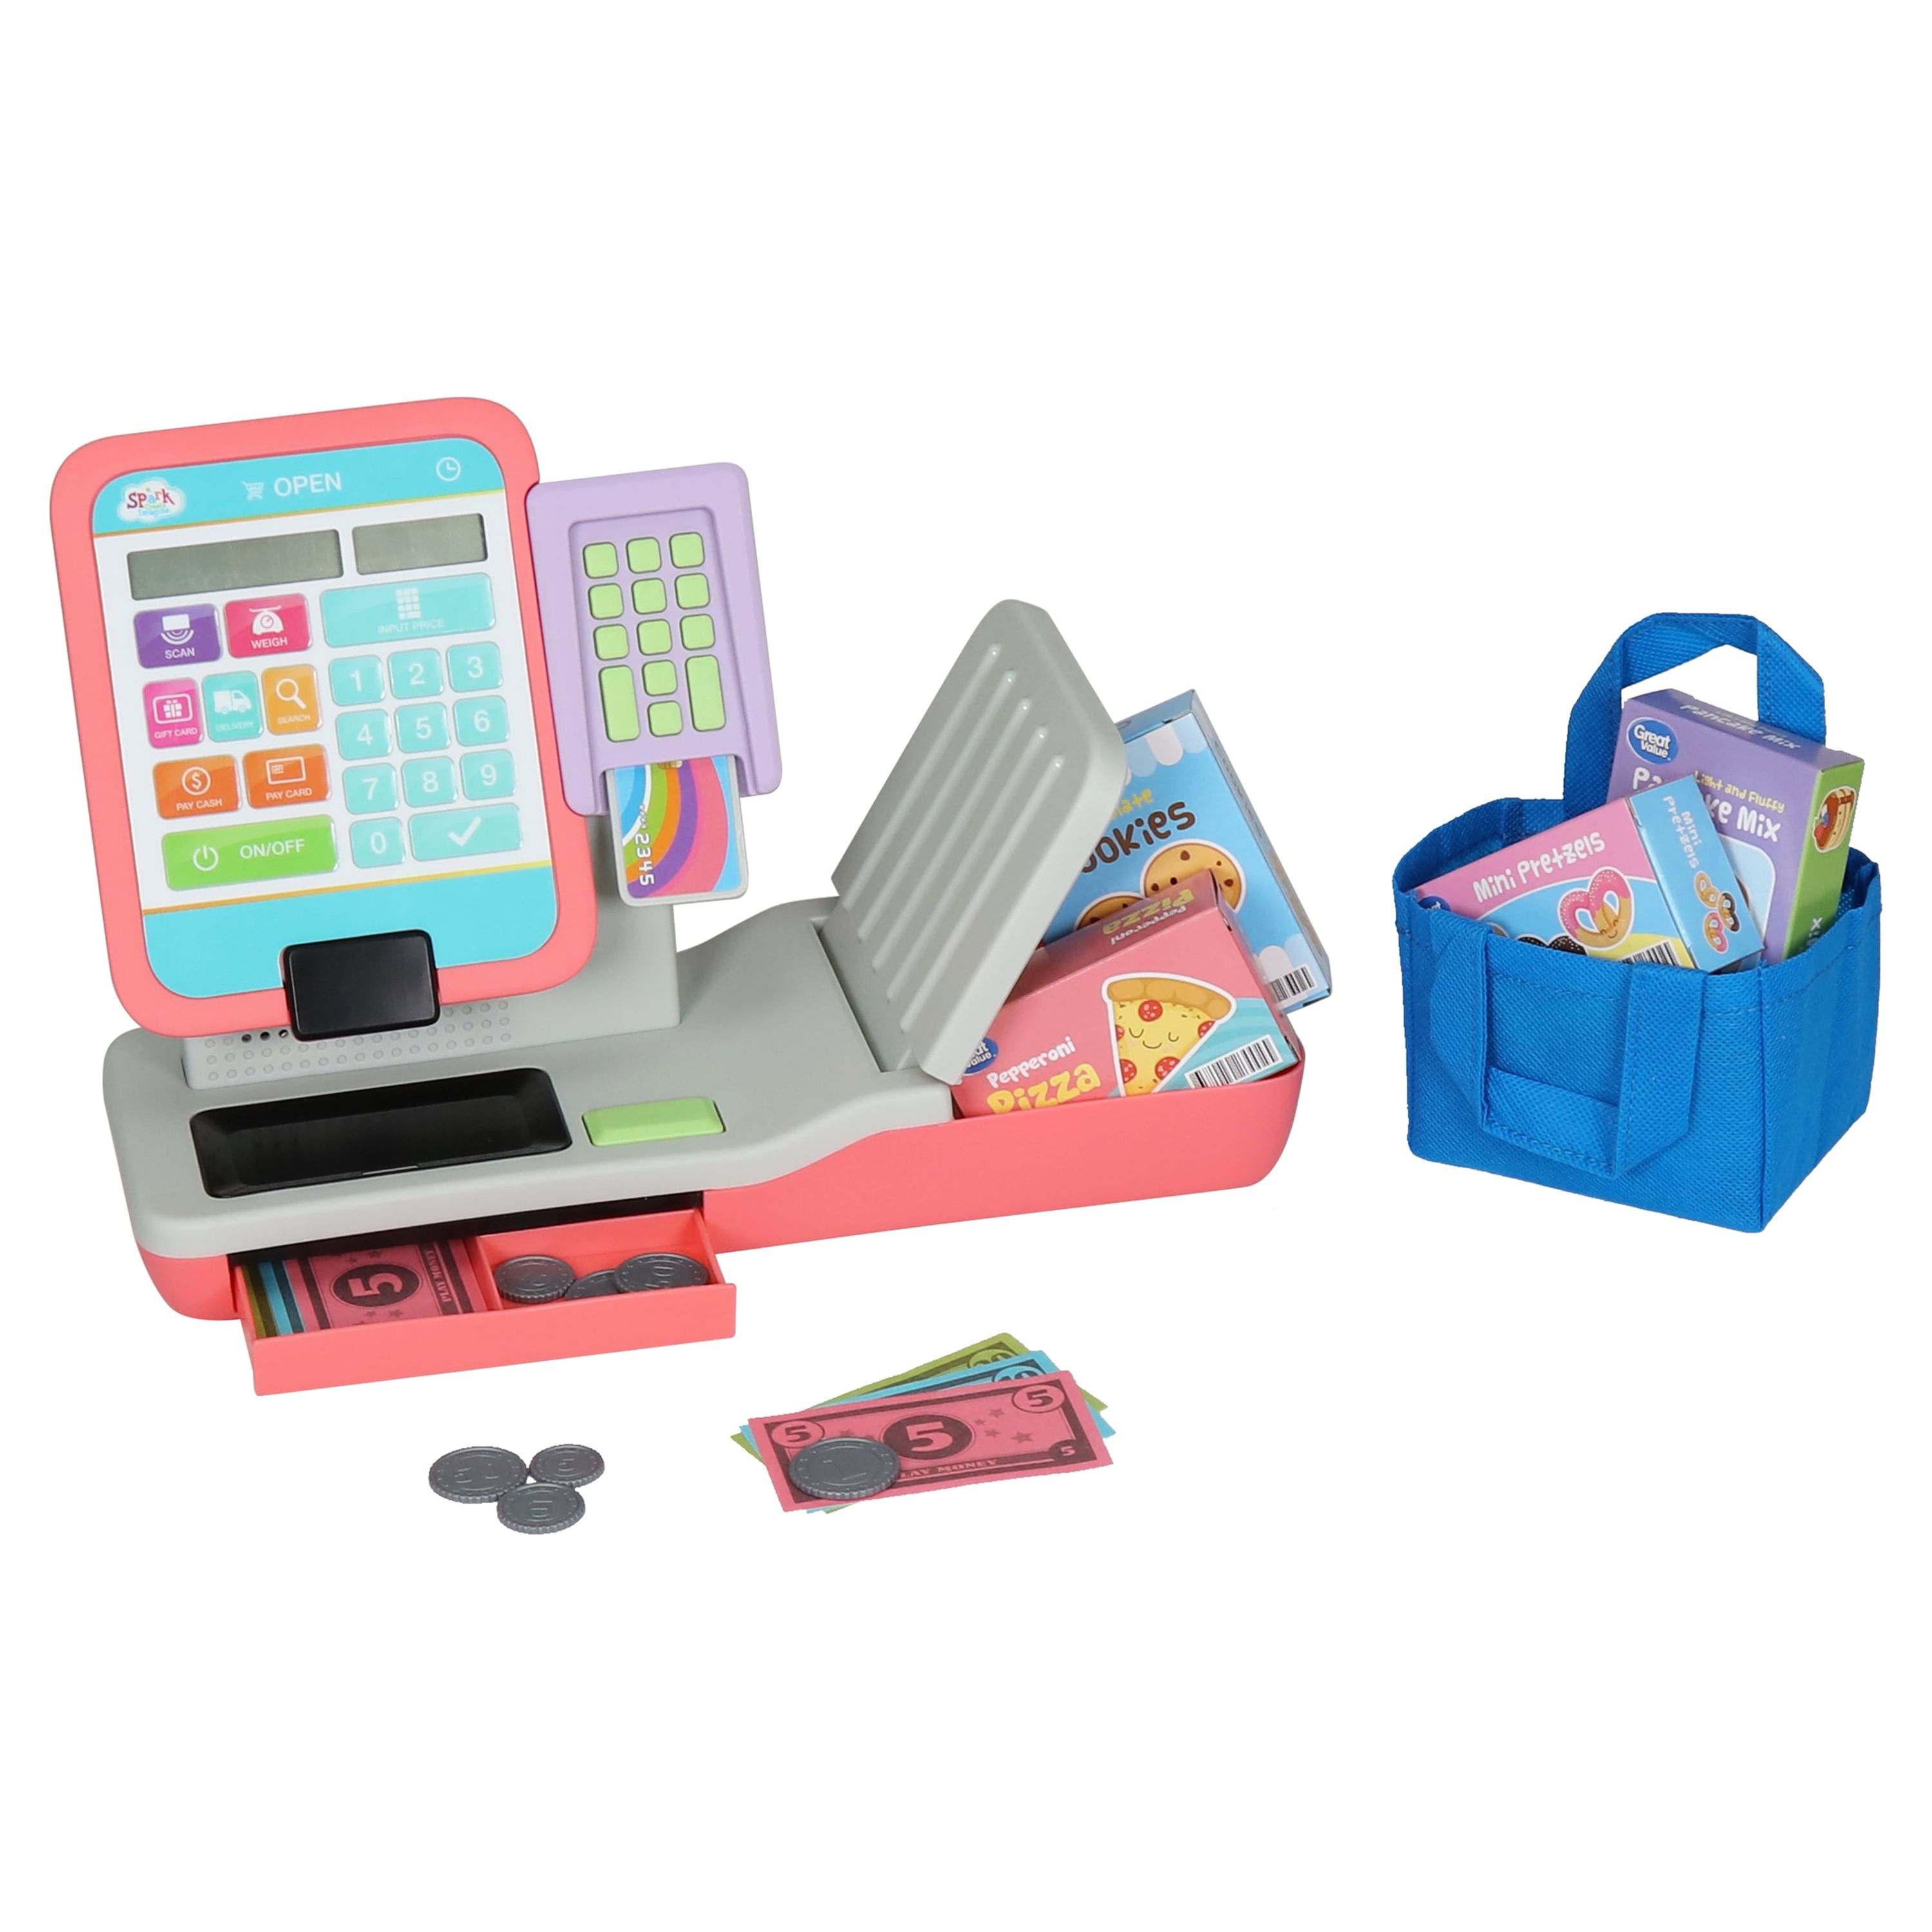 Spark Create Imagine Check Out Station Play Cash Register with Play Money, 21 Pieces - image 3 of 6